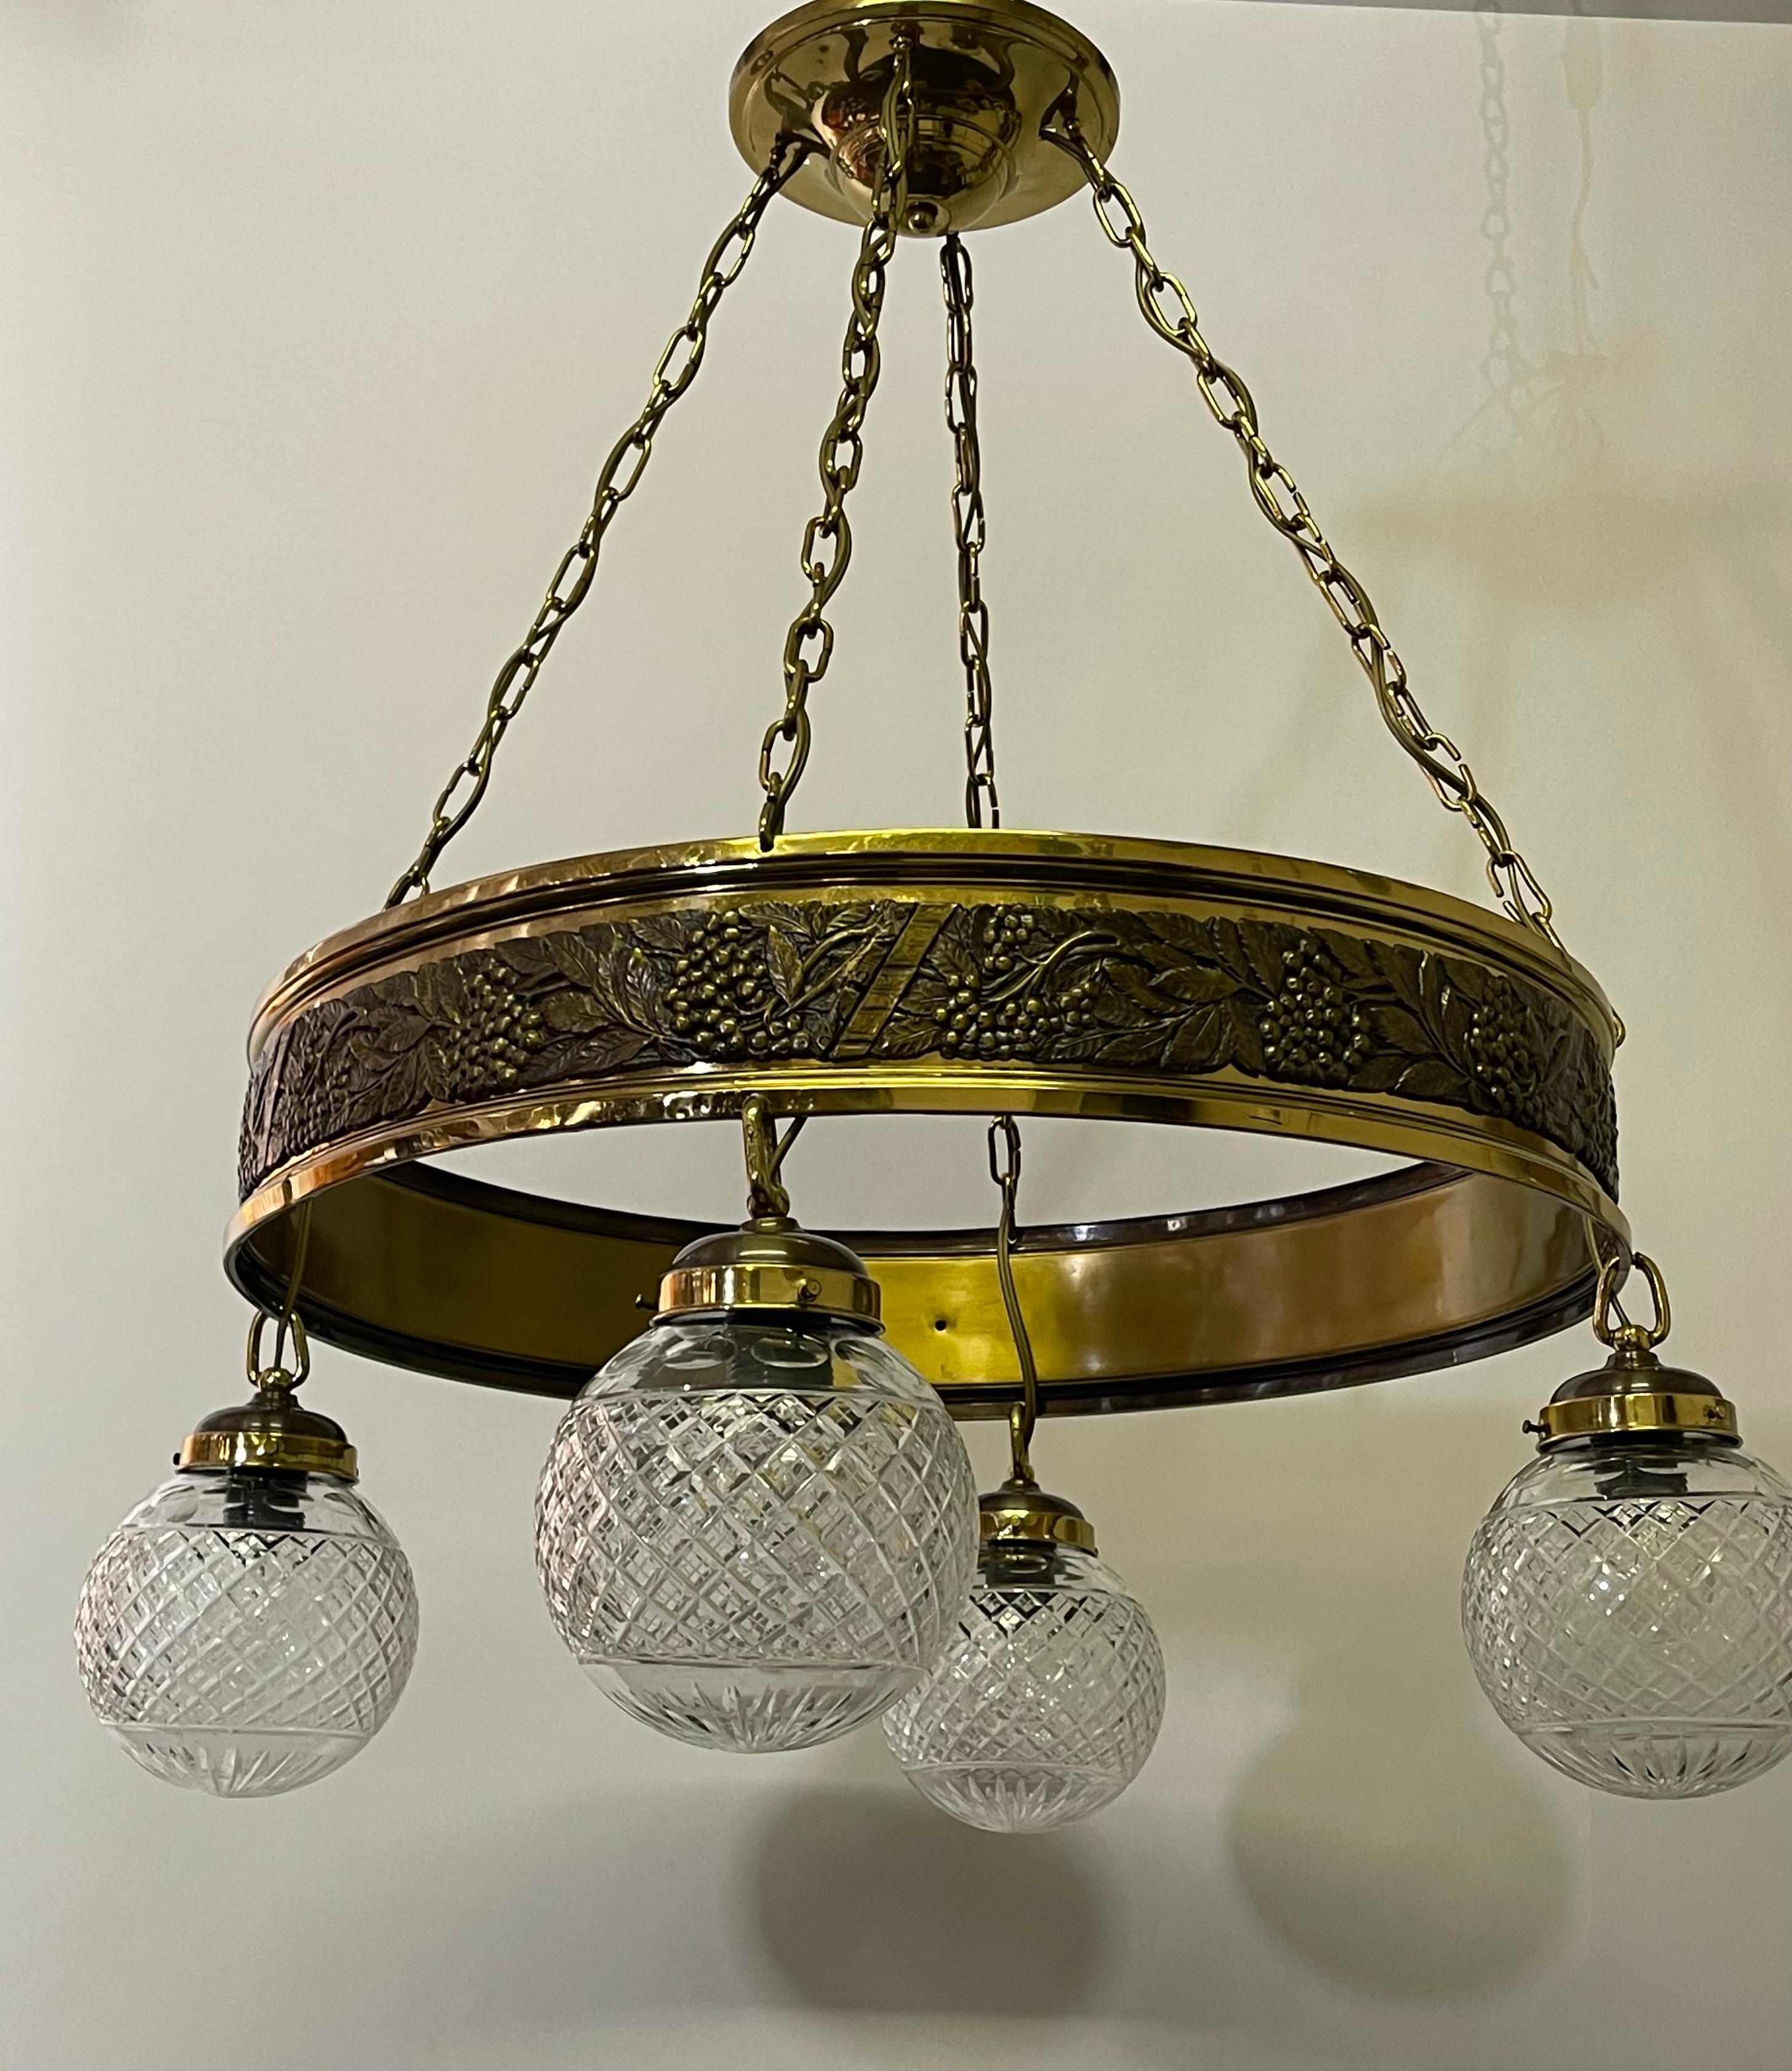 German Polished Brass Grape and Cut Crystal Art Deco Chandelier, circa 1920s For Sale 1